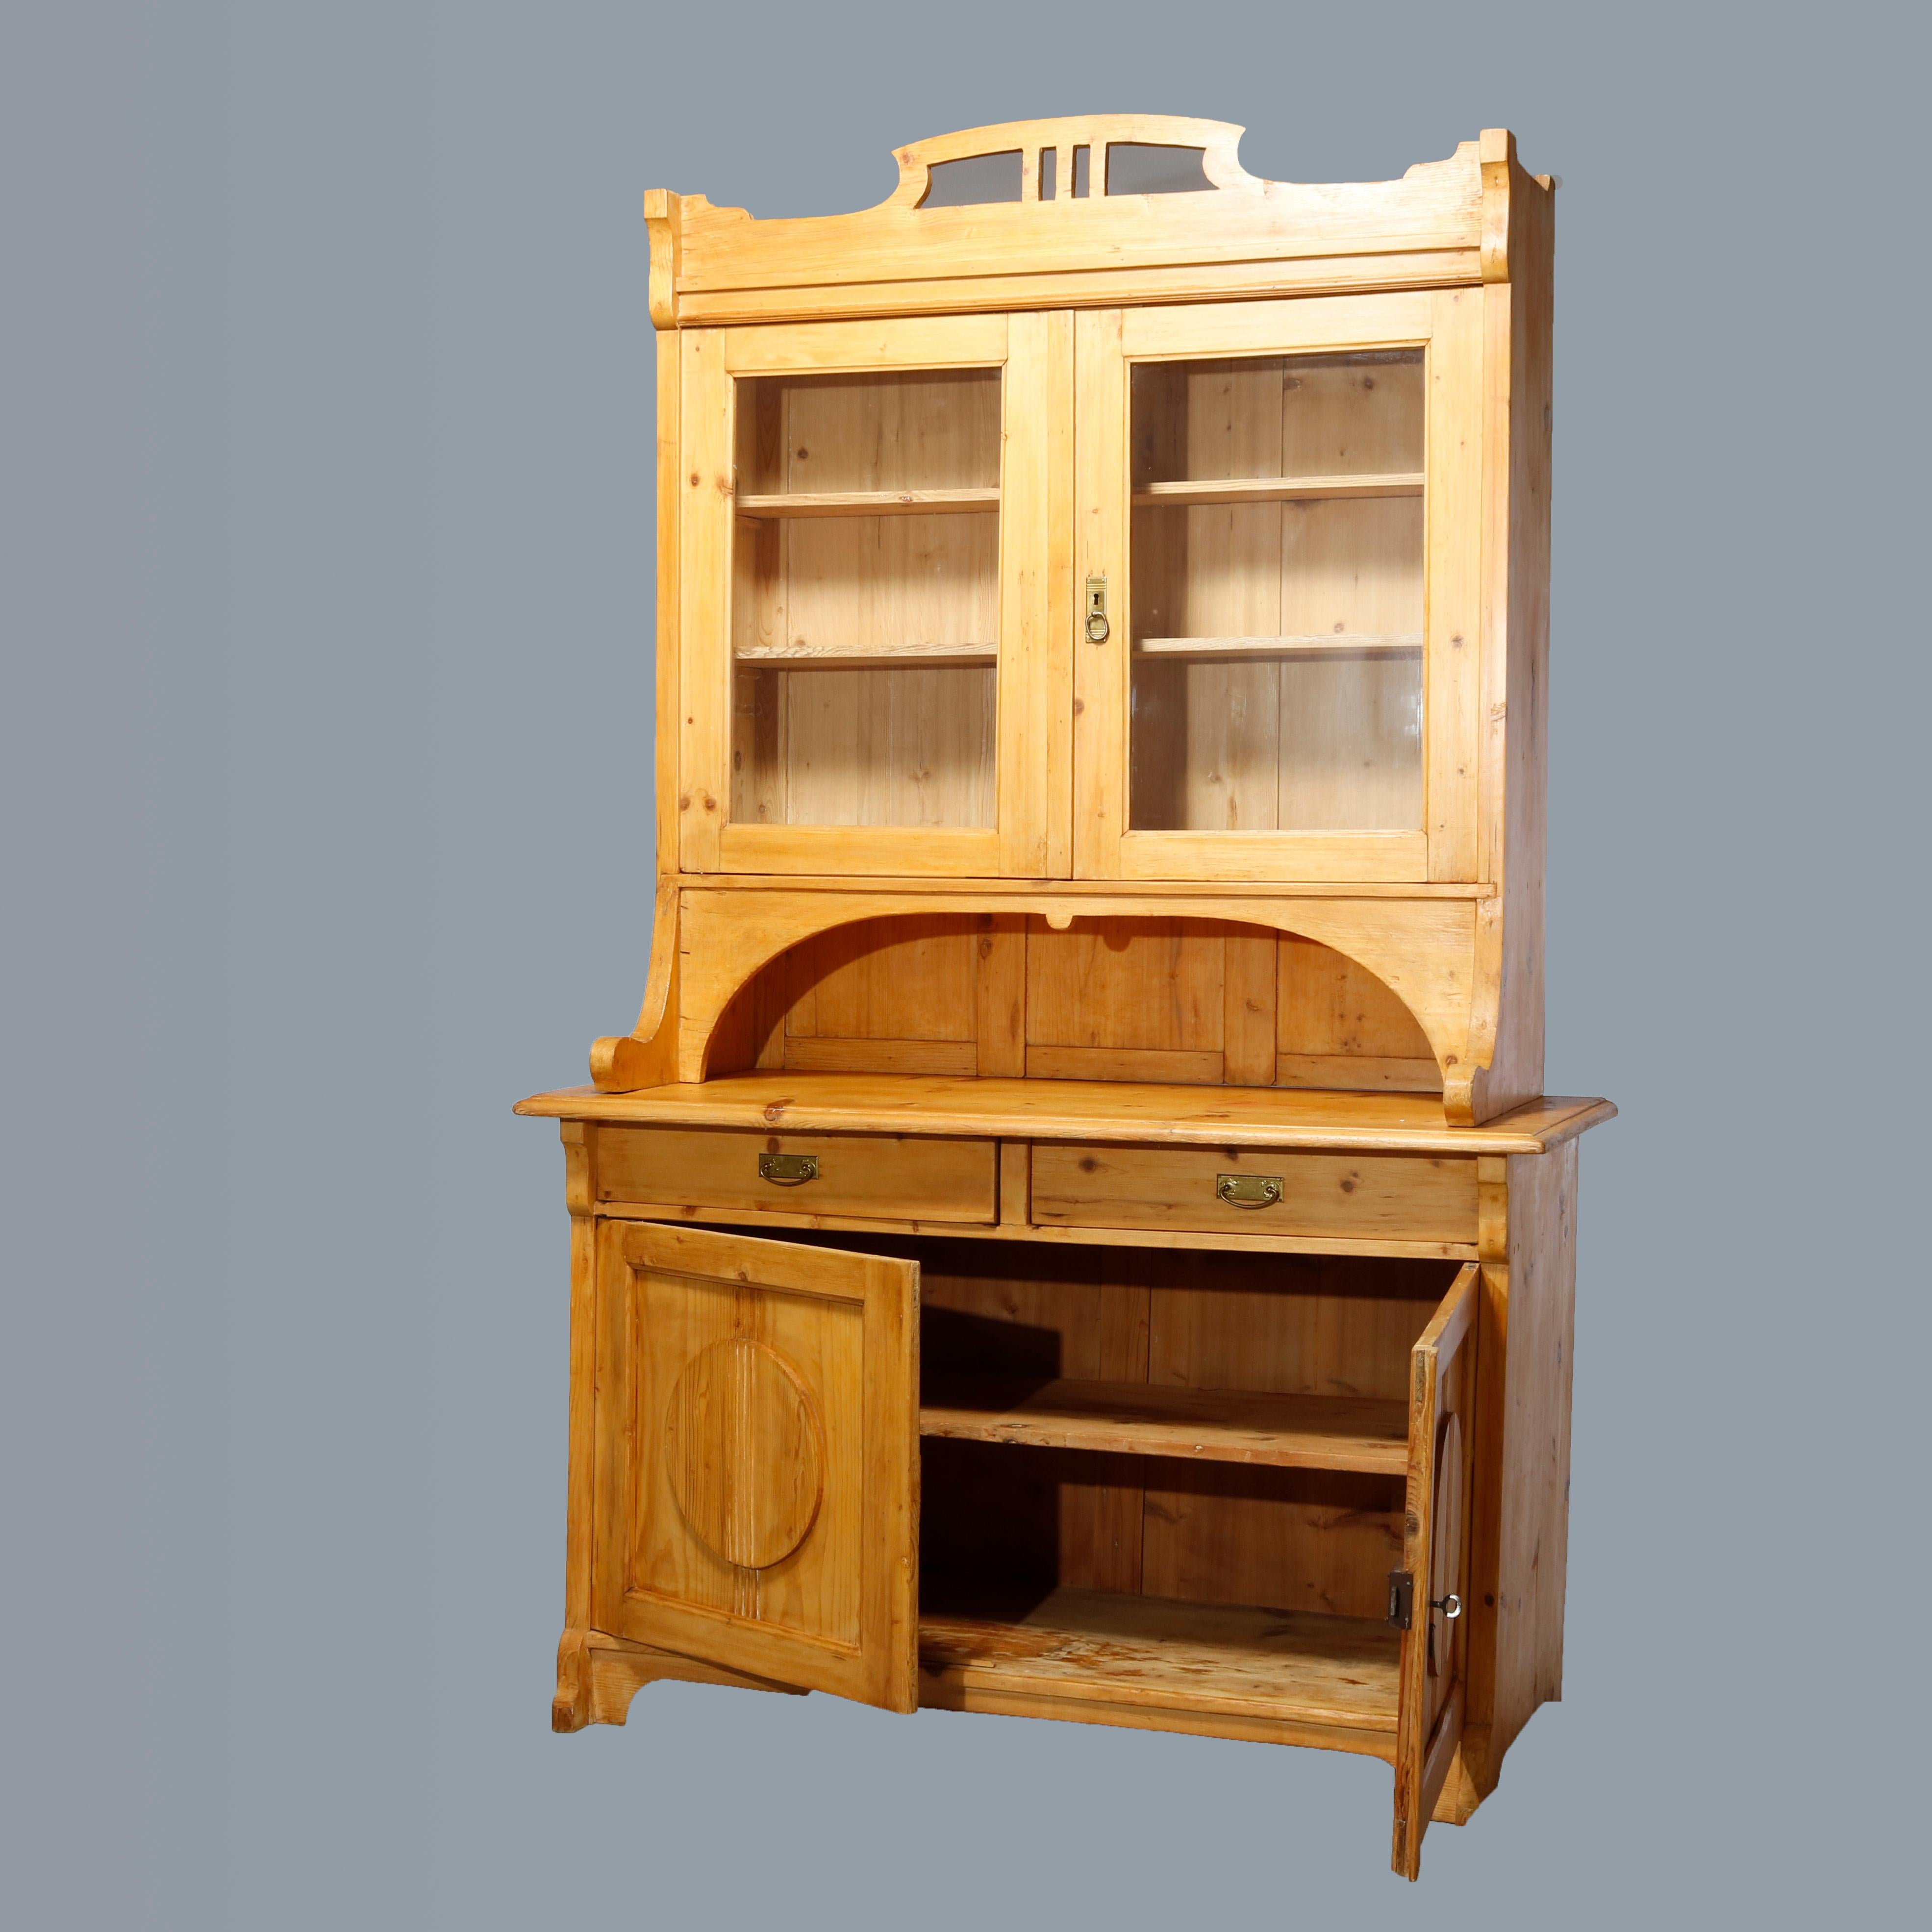 An antique step-back cupboard offers Austrian pine construction with upper hutch having pierced crest over double glass door cabinet surmounting lower cabinet having two drawers over cabinet having double paneled doors with circular reserves,